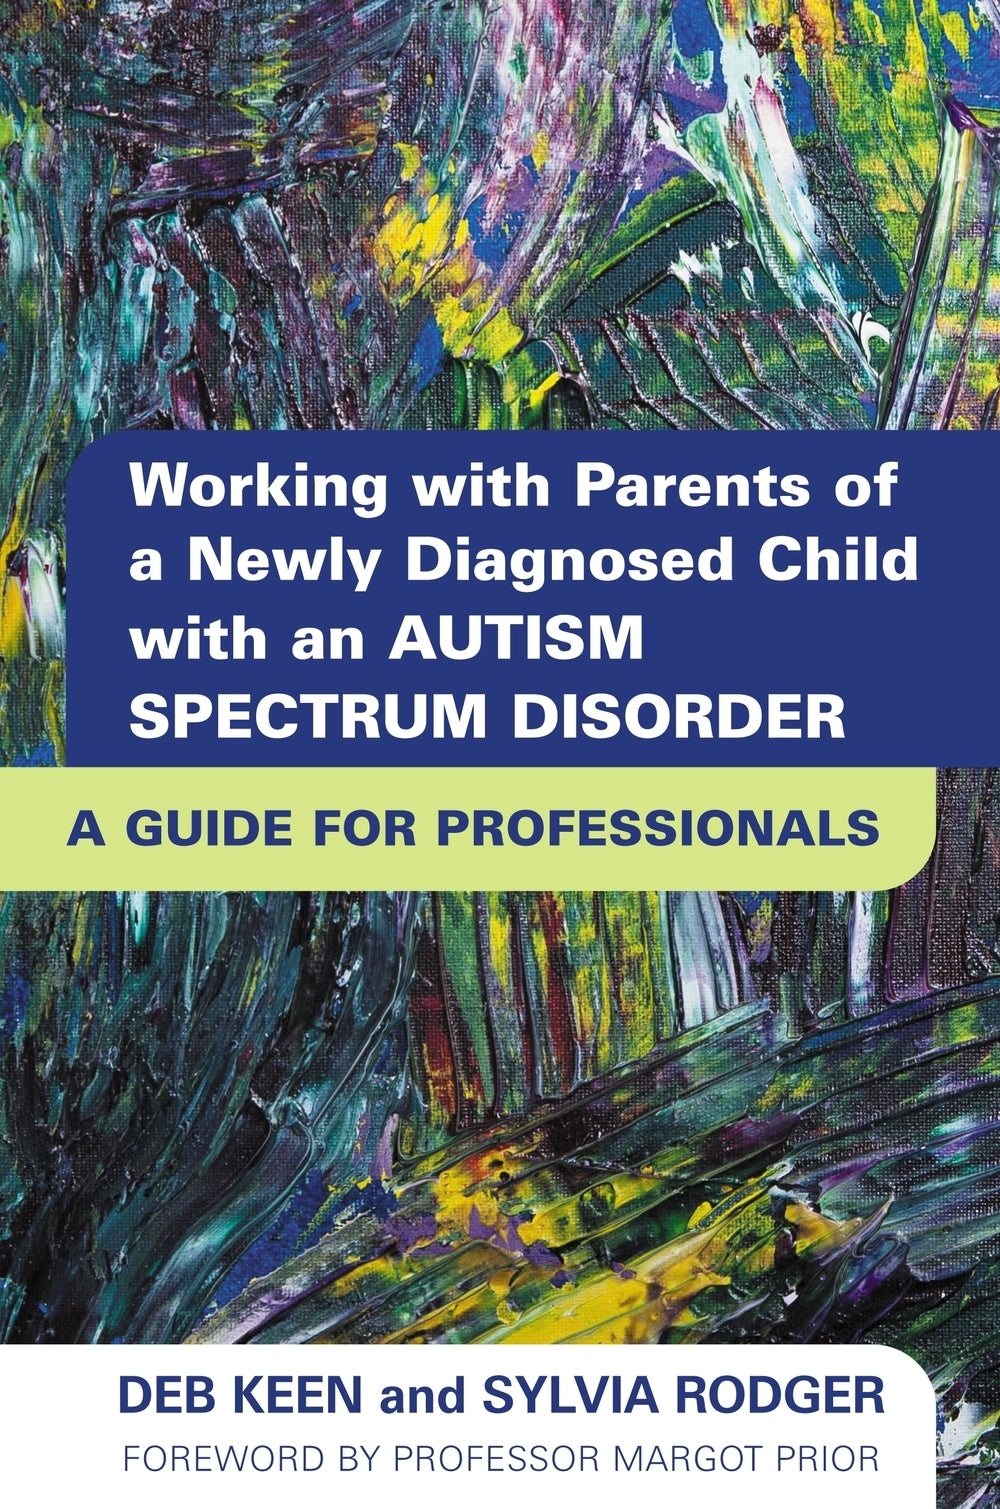 Working with Parents of a Newly Diagnosed Child with an Autism Spectrum Disorder by Deb Keen, SYLVIA RODGER